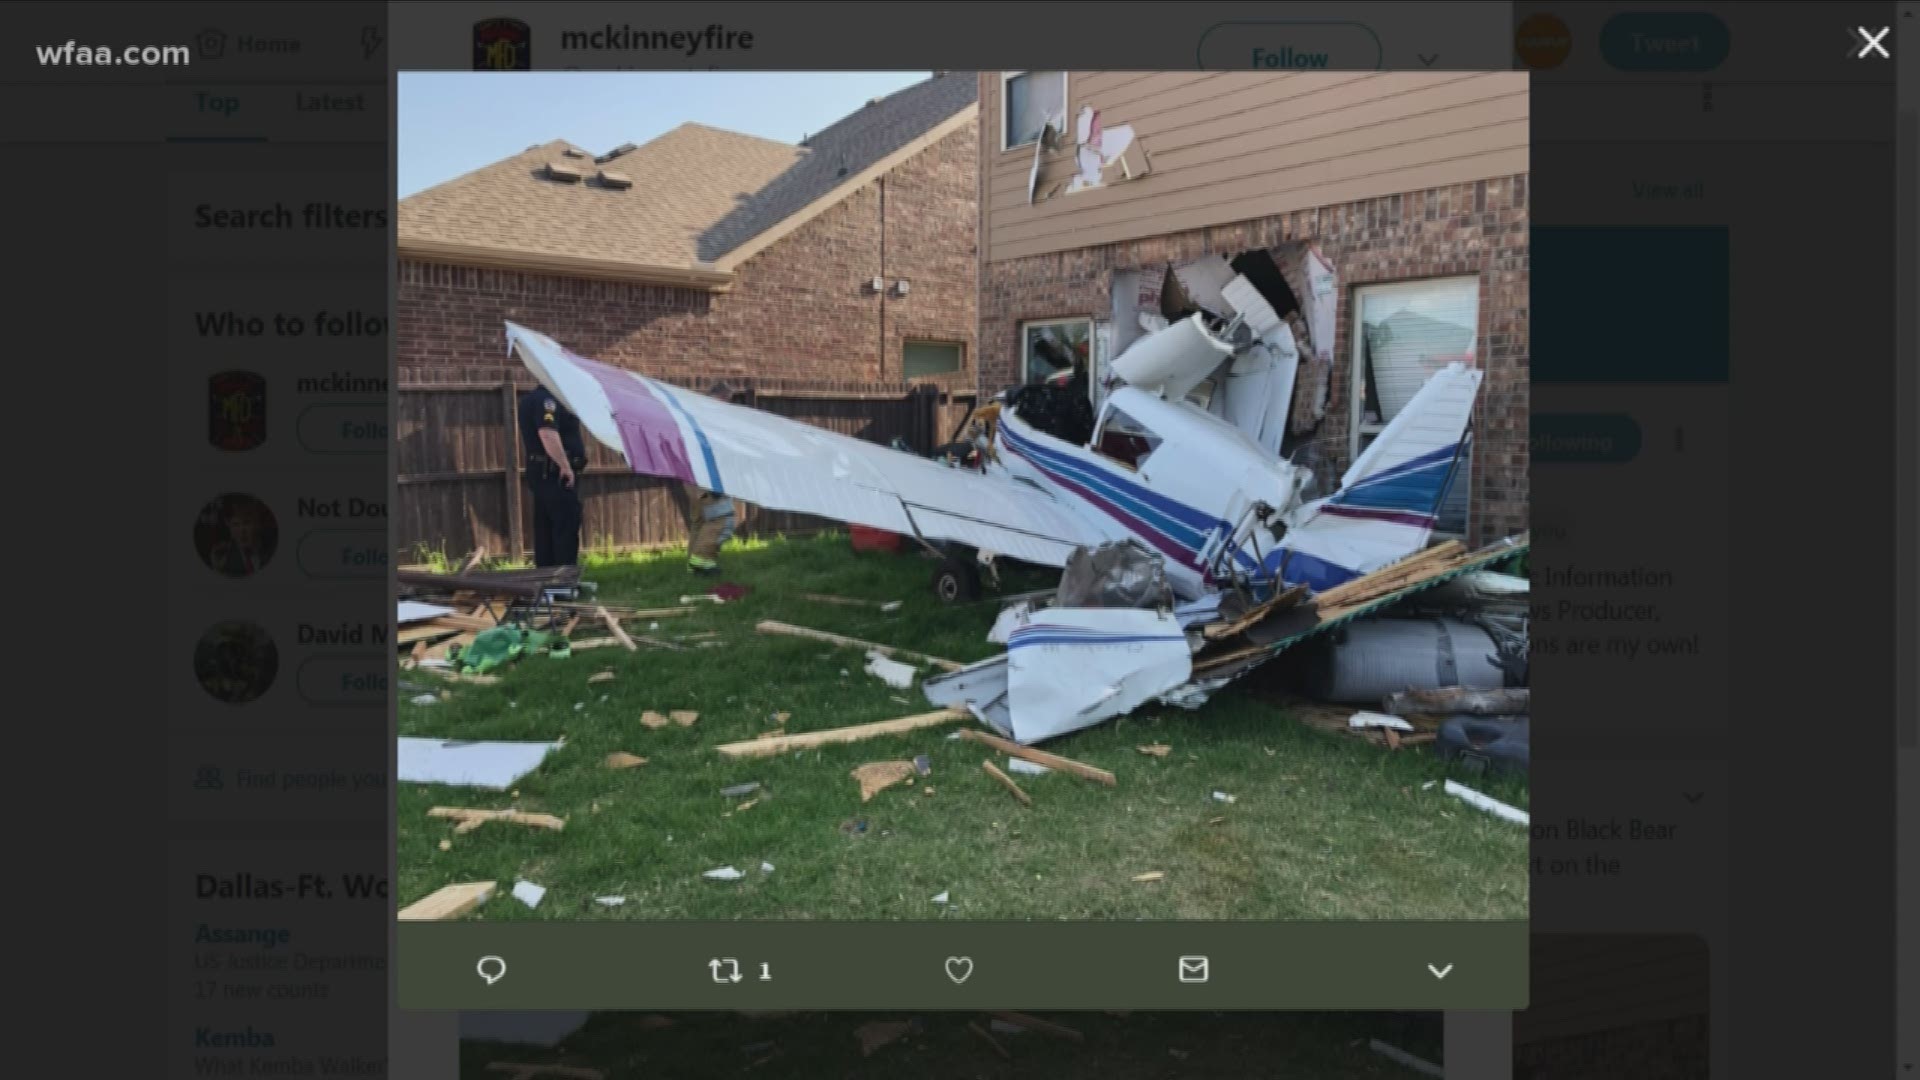 Two were taken to an area hospital after a small plane crashed early Thursday evening into a McKinney home.